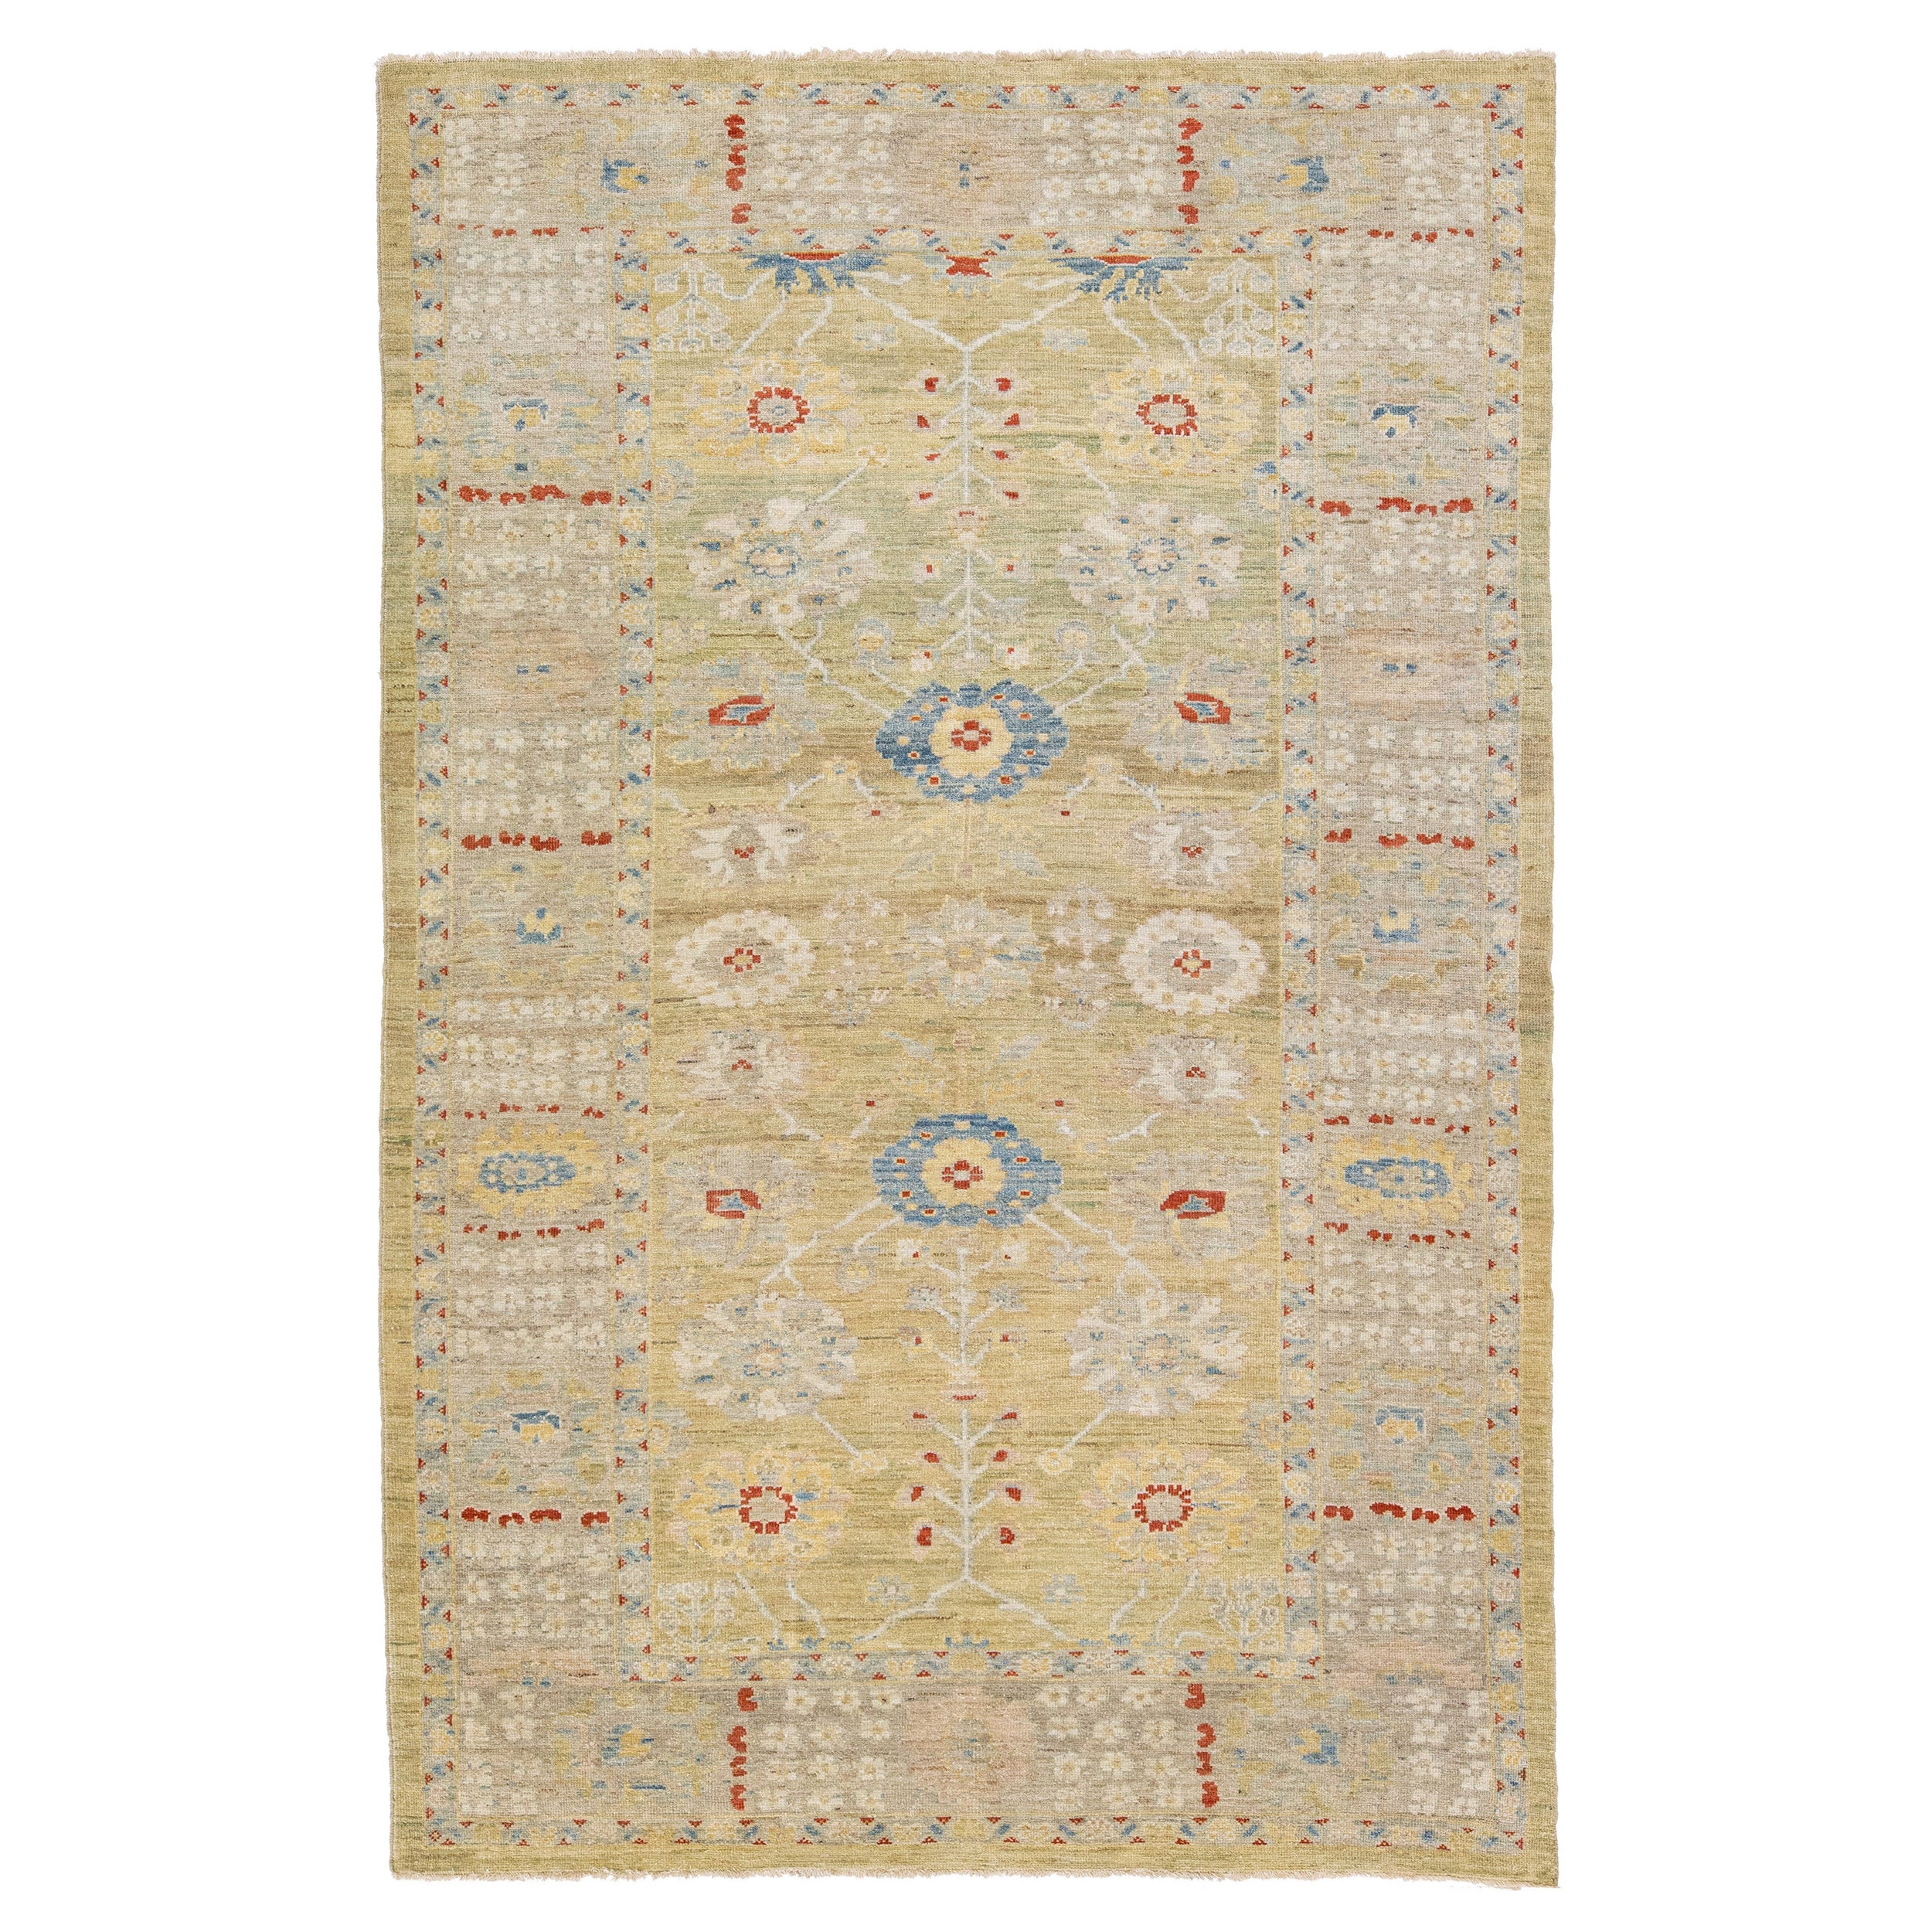 Modern Sultanabad Yellow Handmade Wool Rug with Floral Design